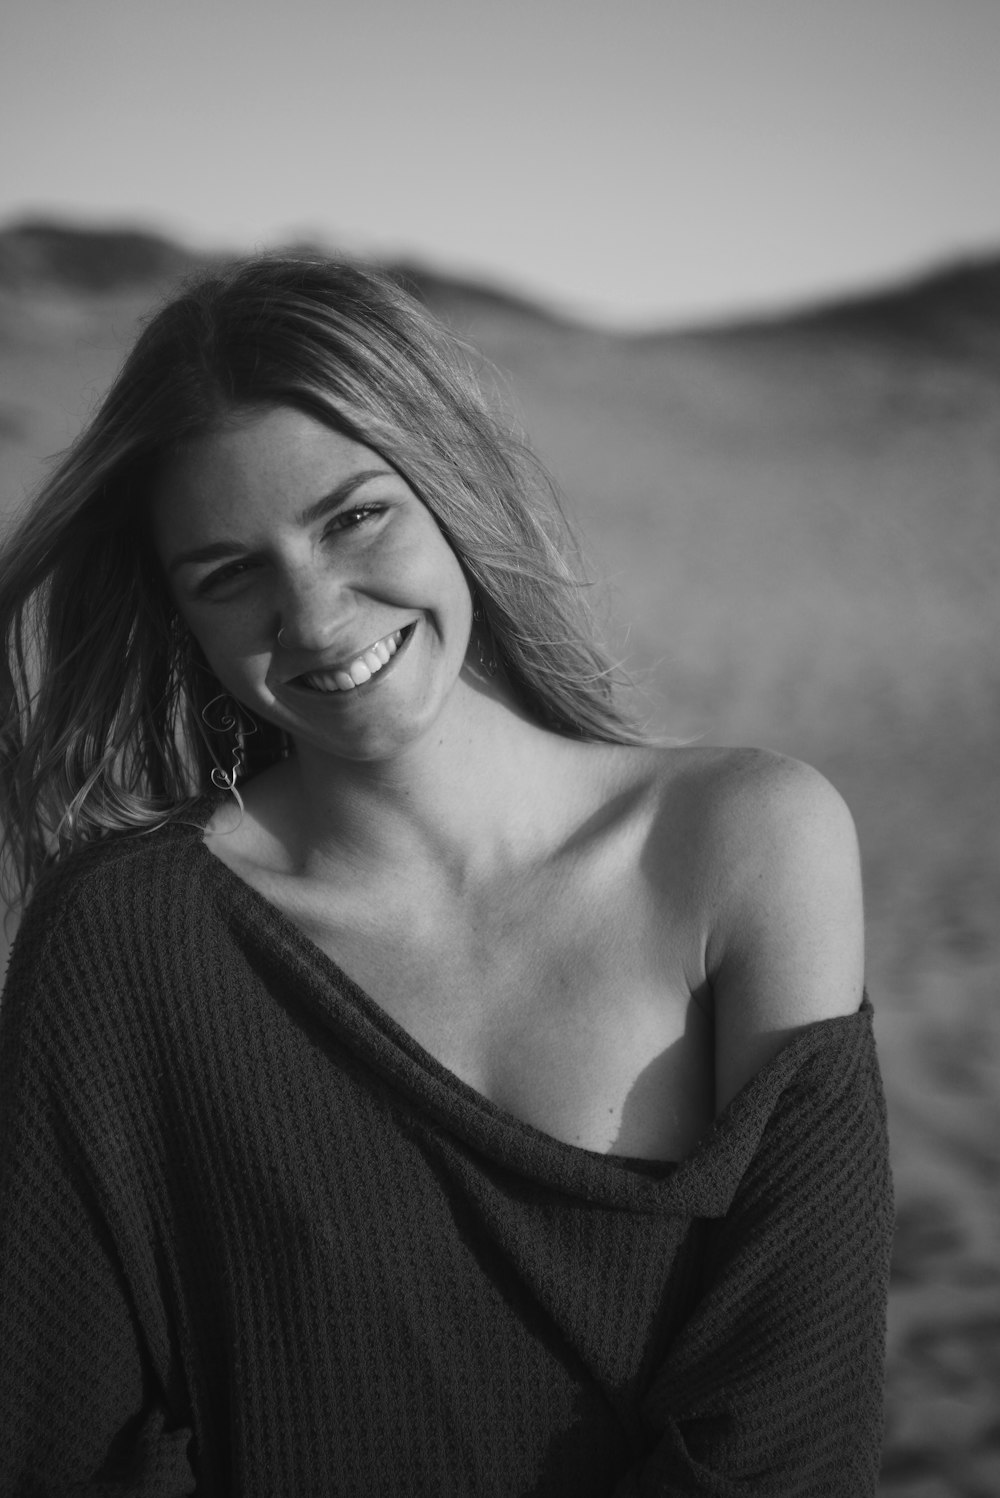 greyscale photo of woman wearing off-shoulder shirt while smiling